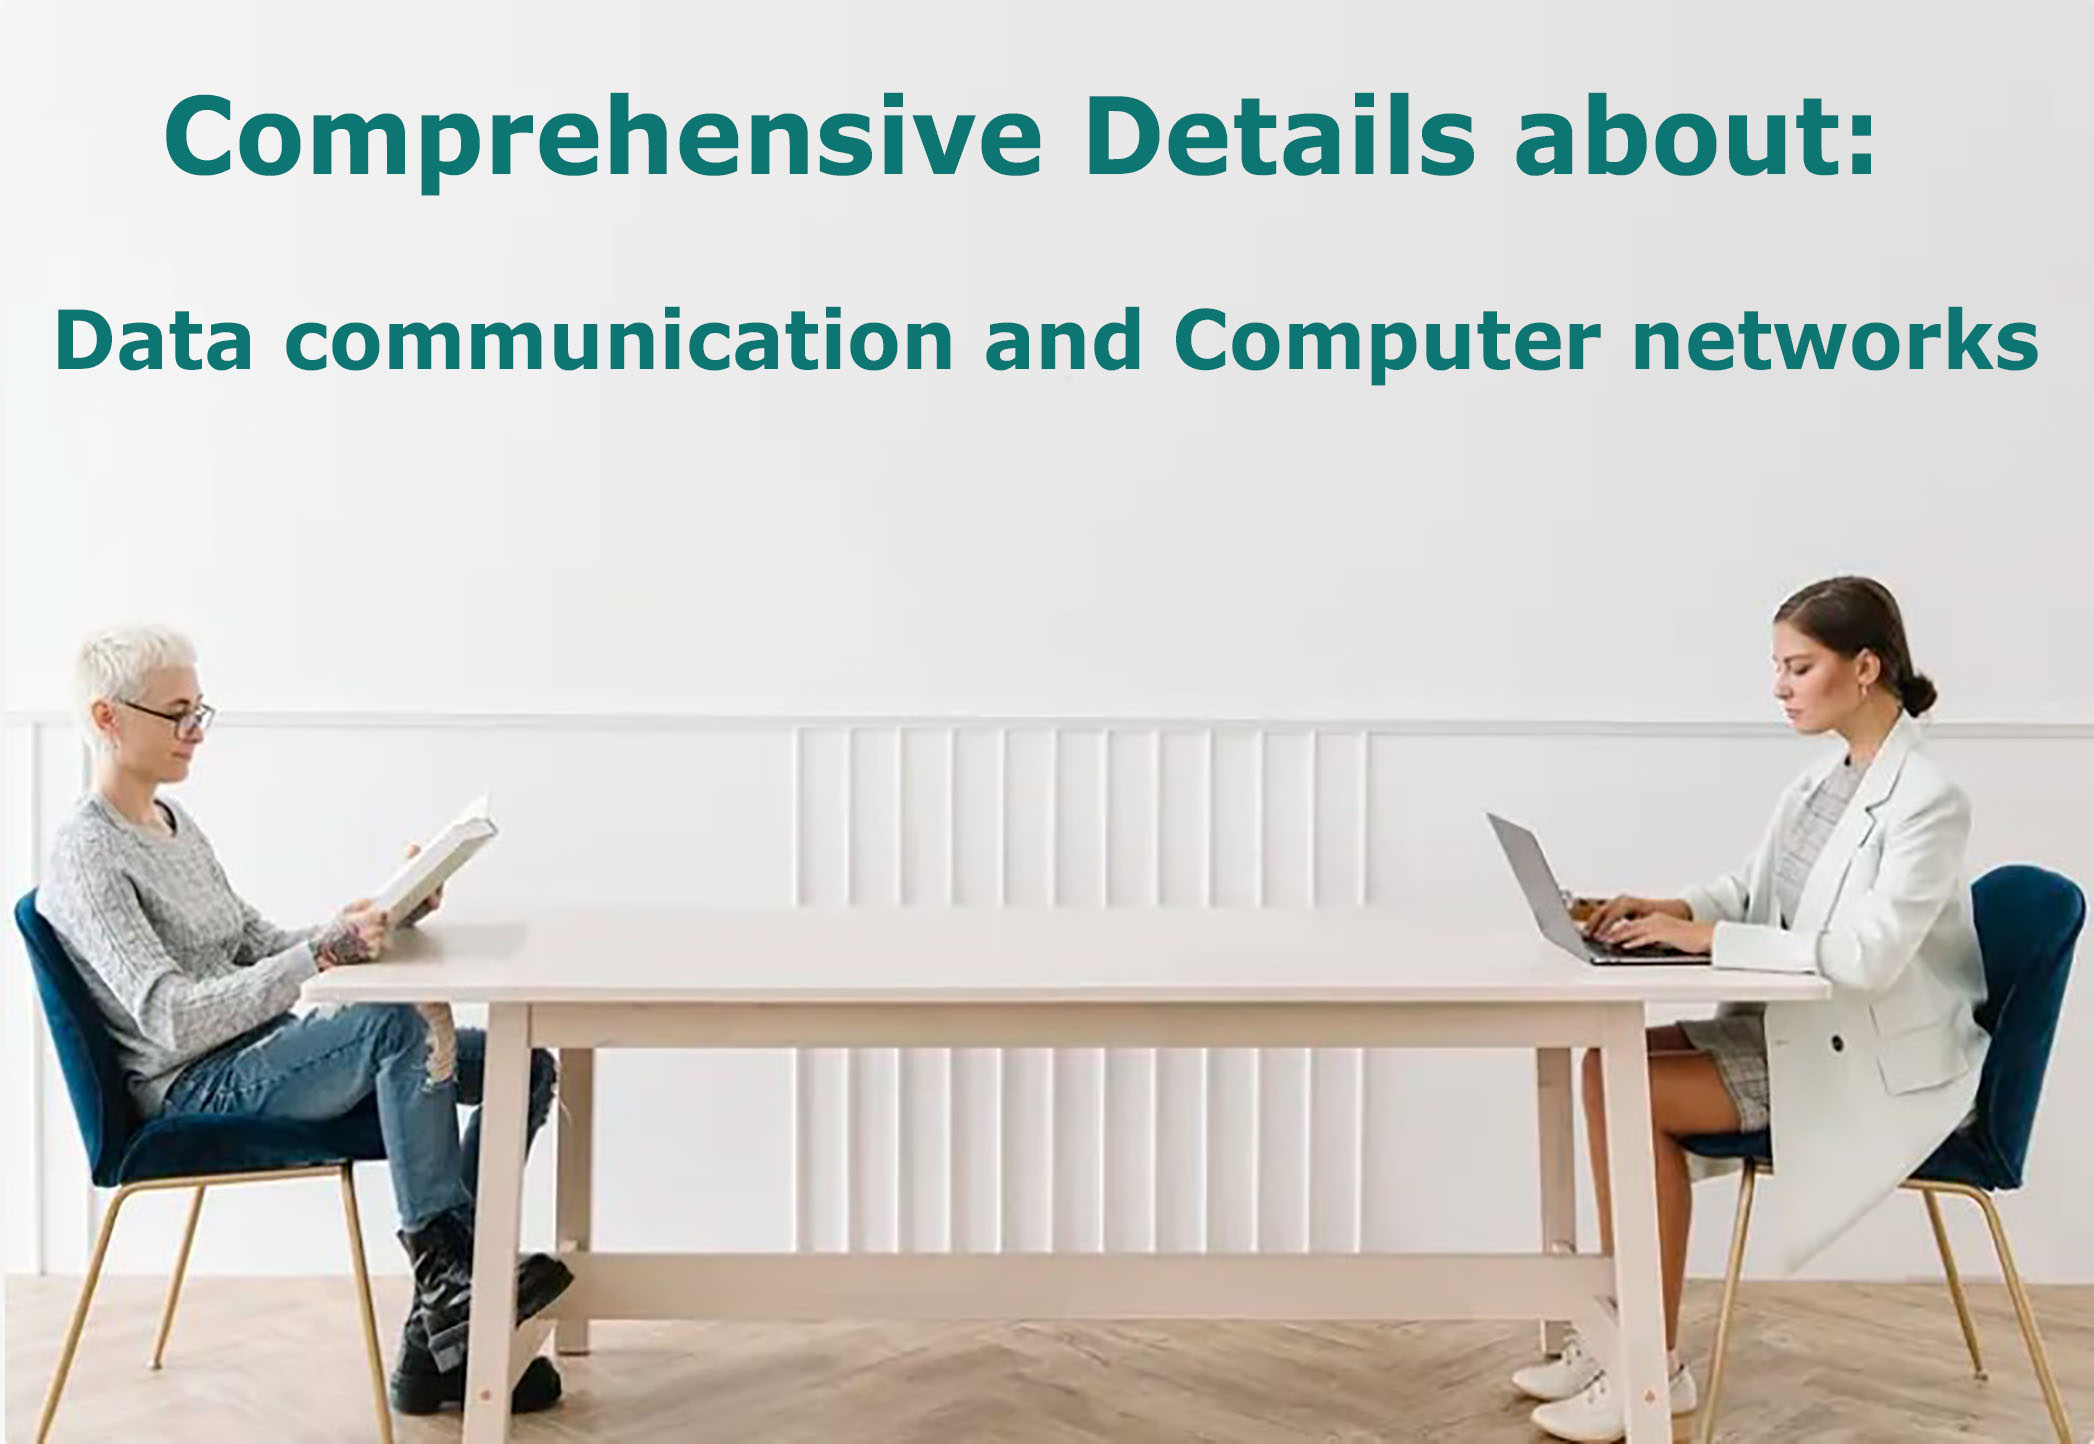 Comprehensive Details about Data communication and Computer networks